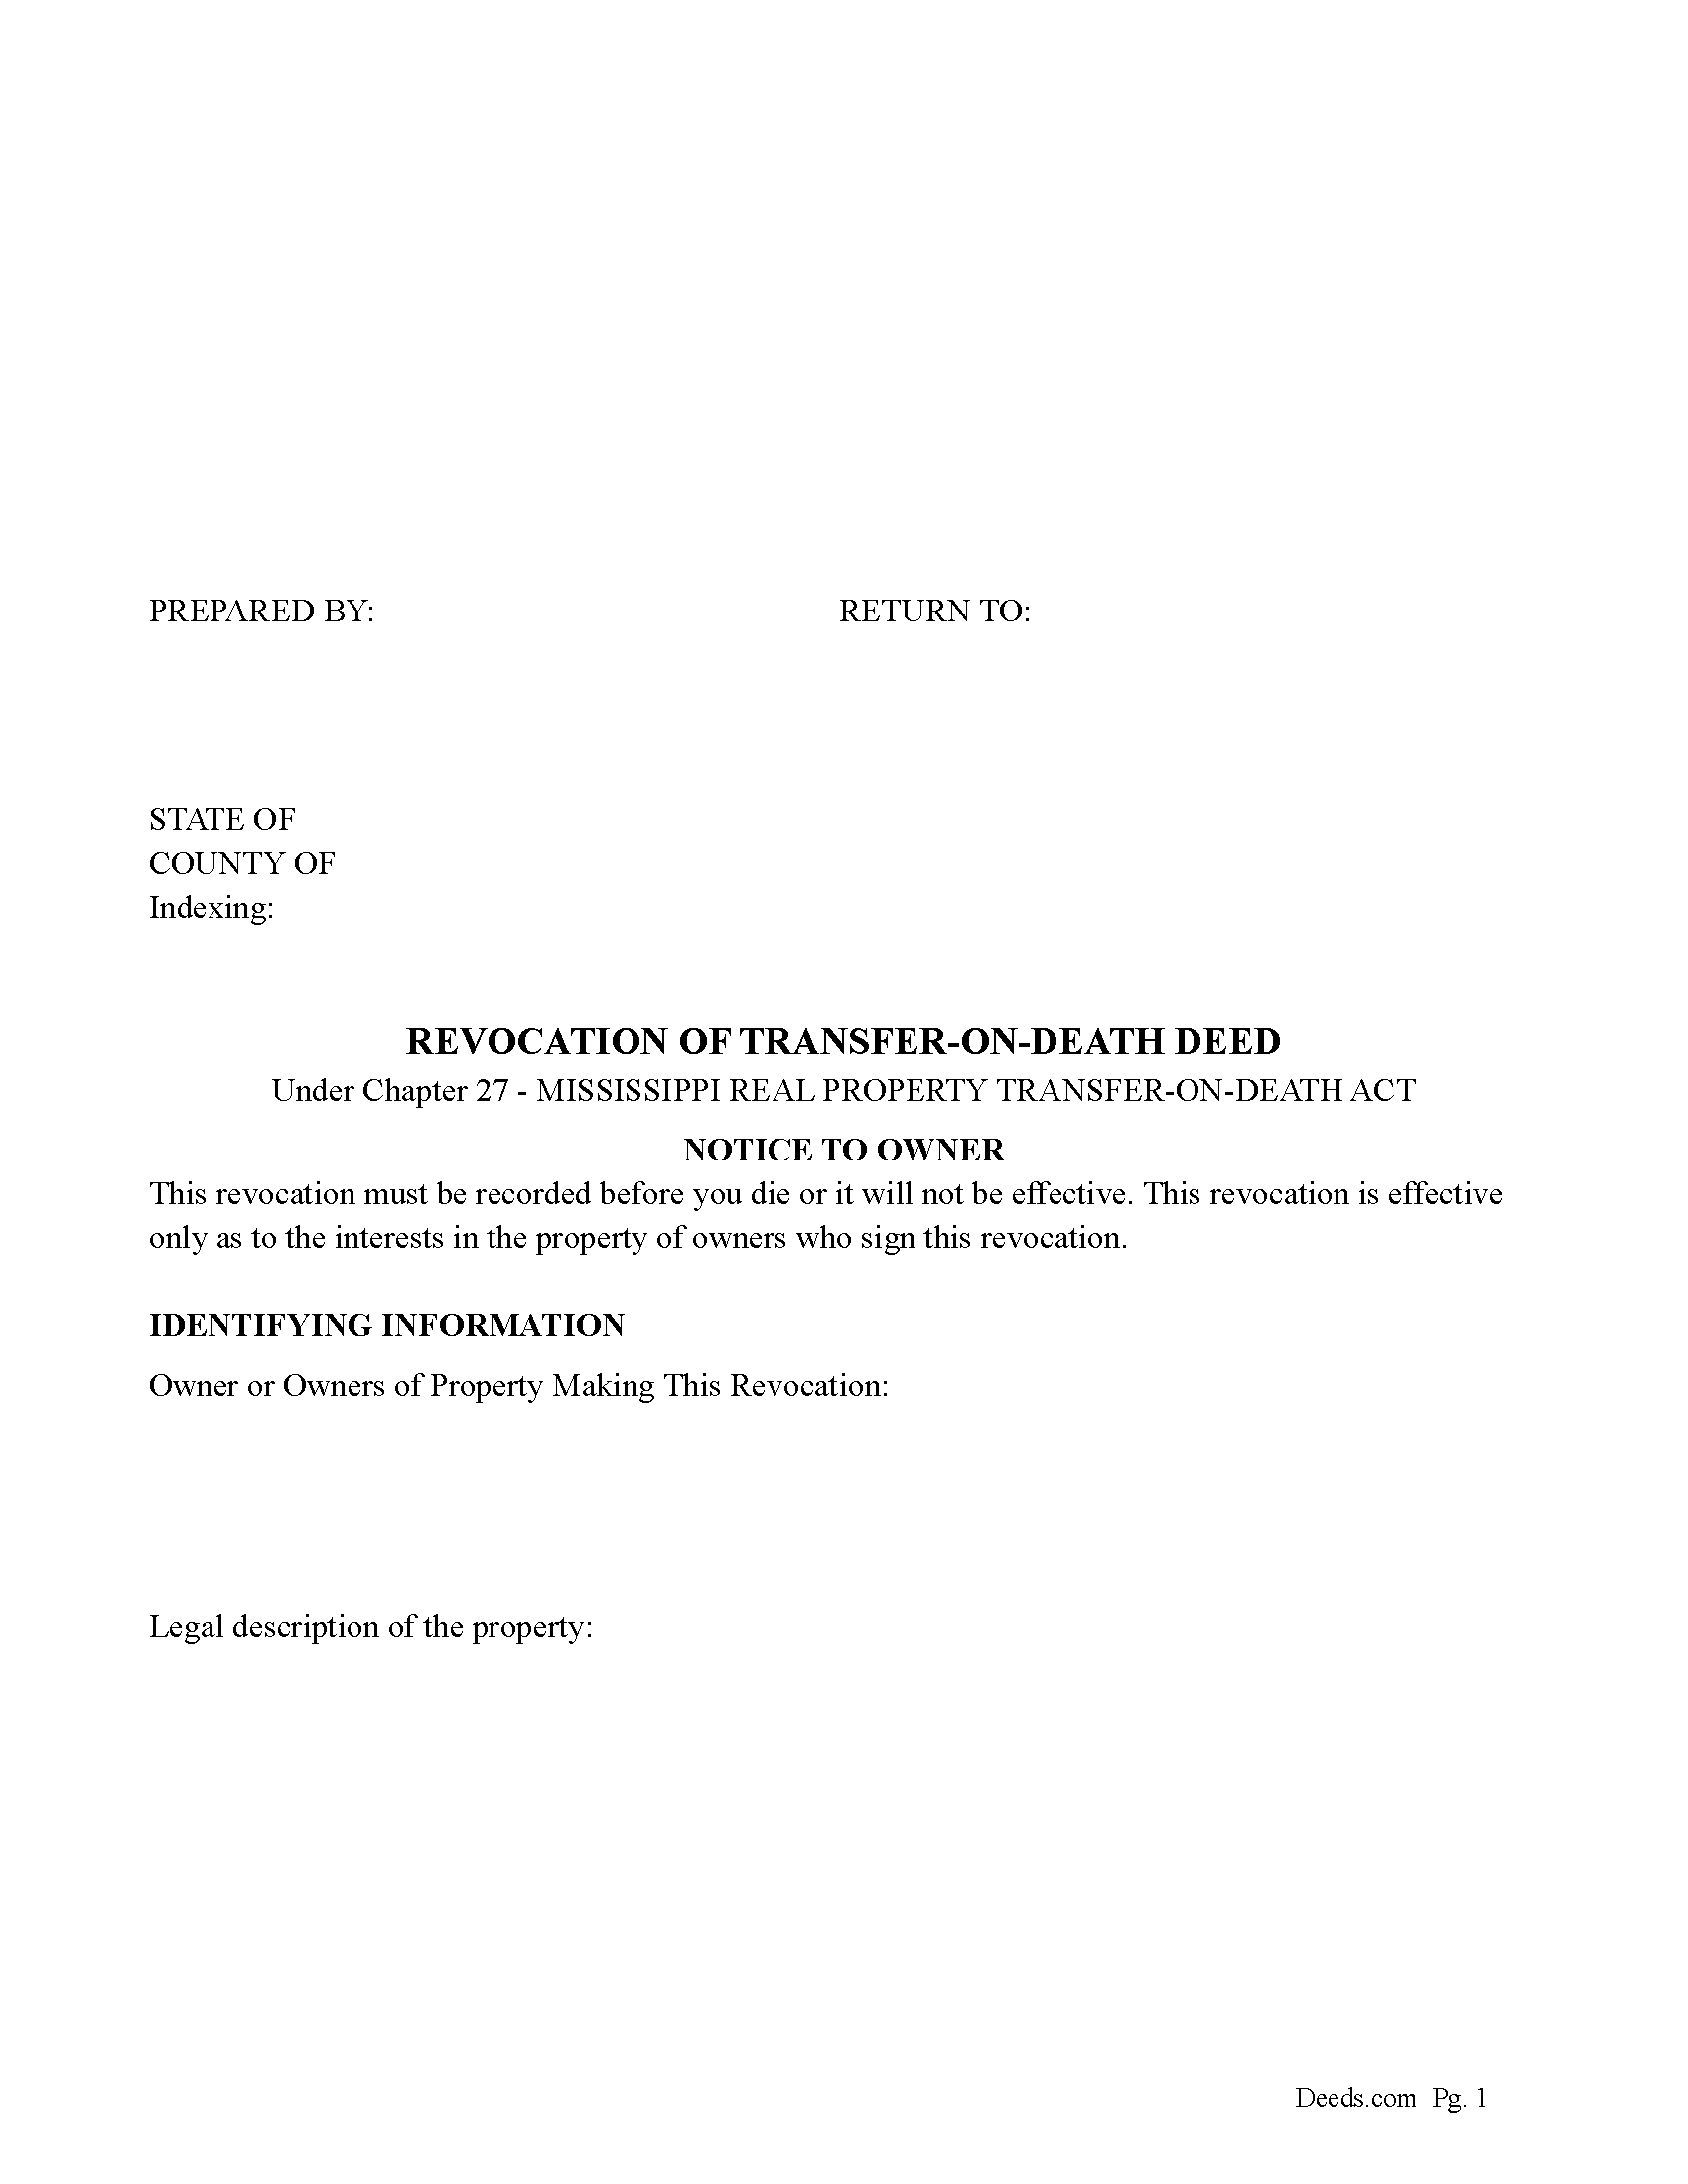 Revocation of Transfer on Death Deed Form